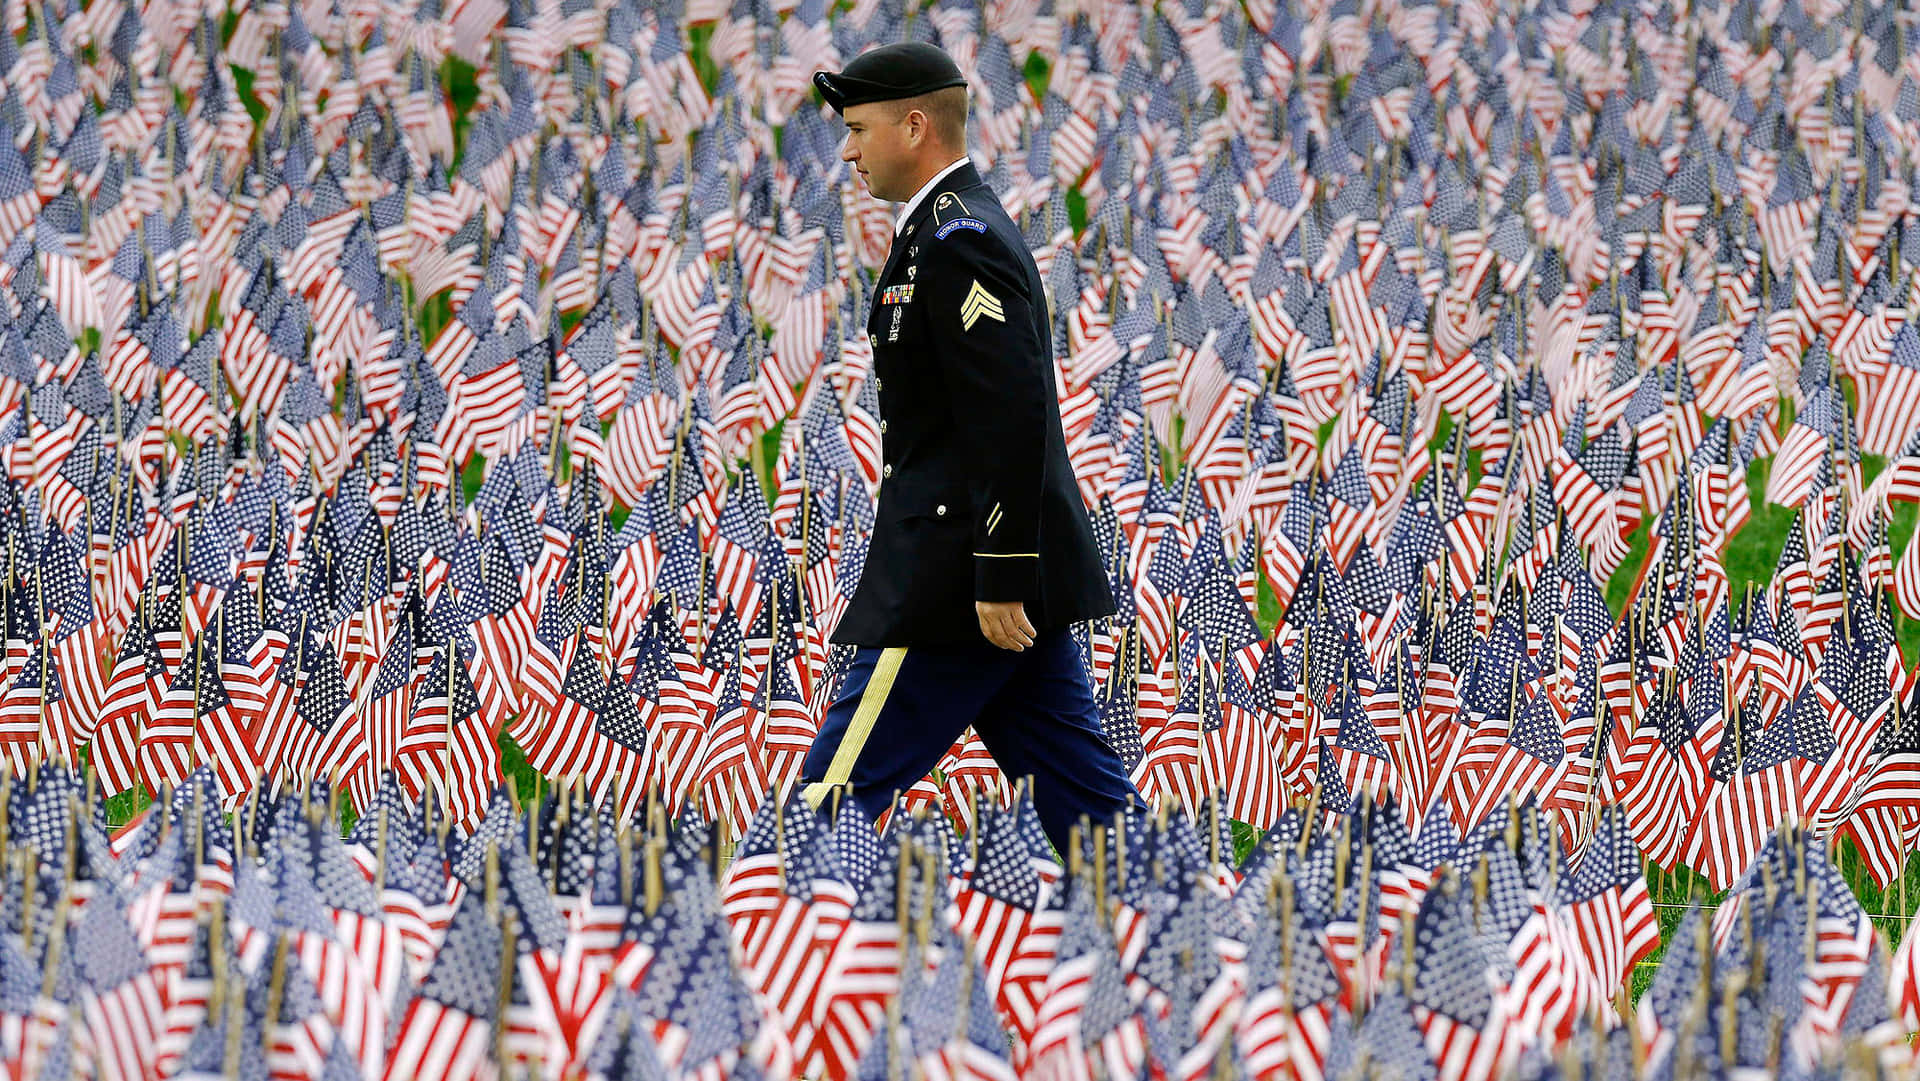 Remembering those who bravely served on Memorial Day.